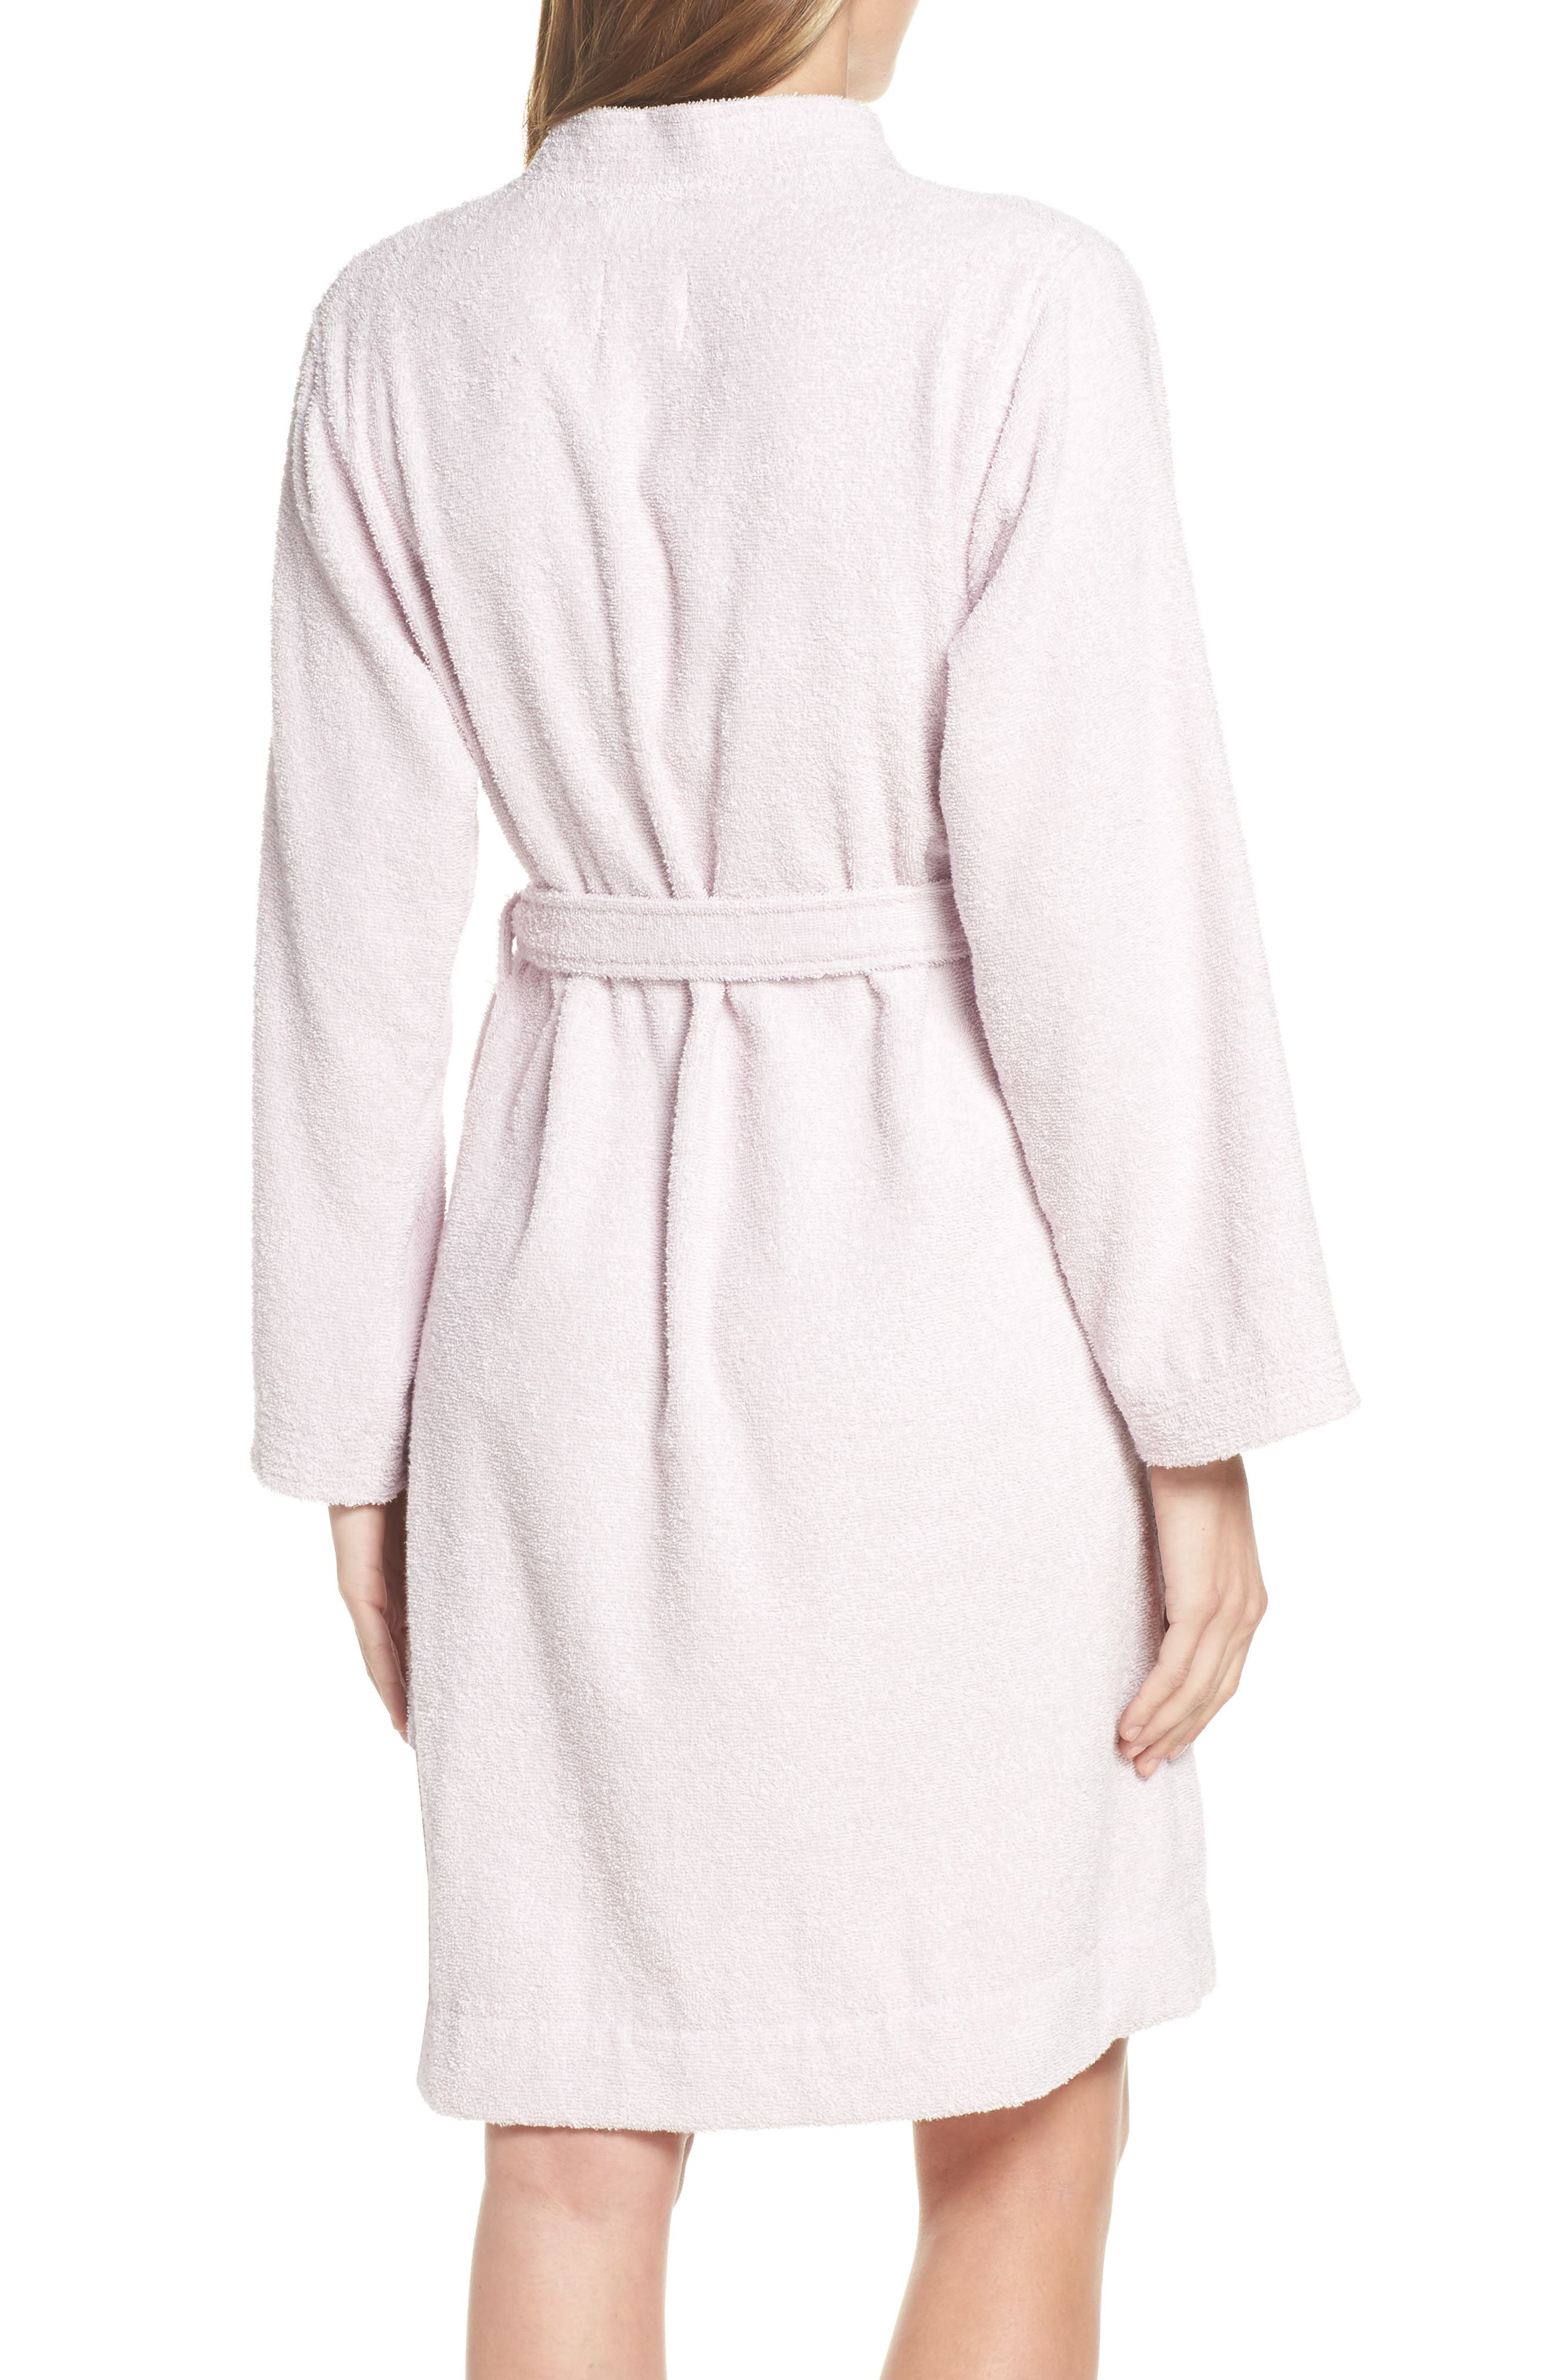 ugg lorie terry short robe